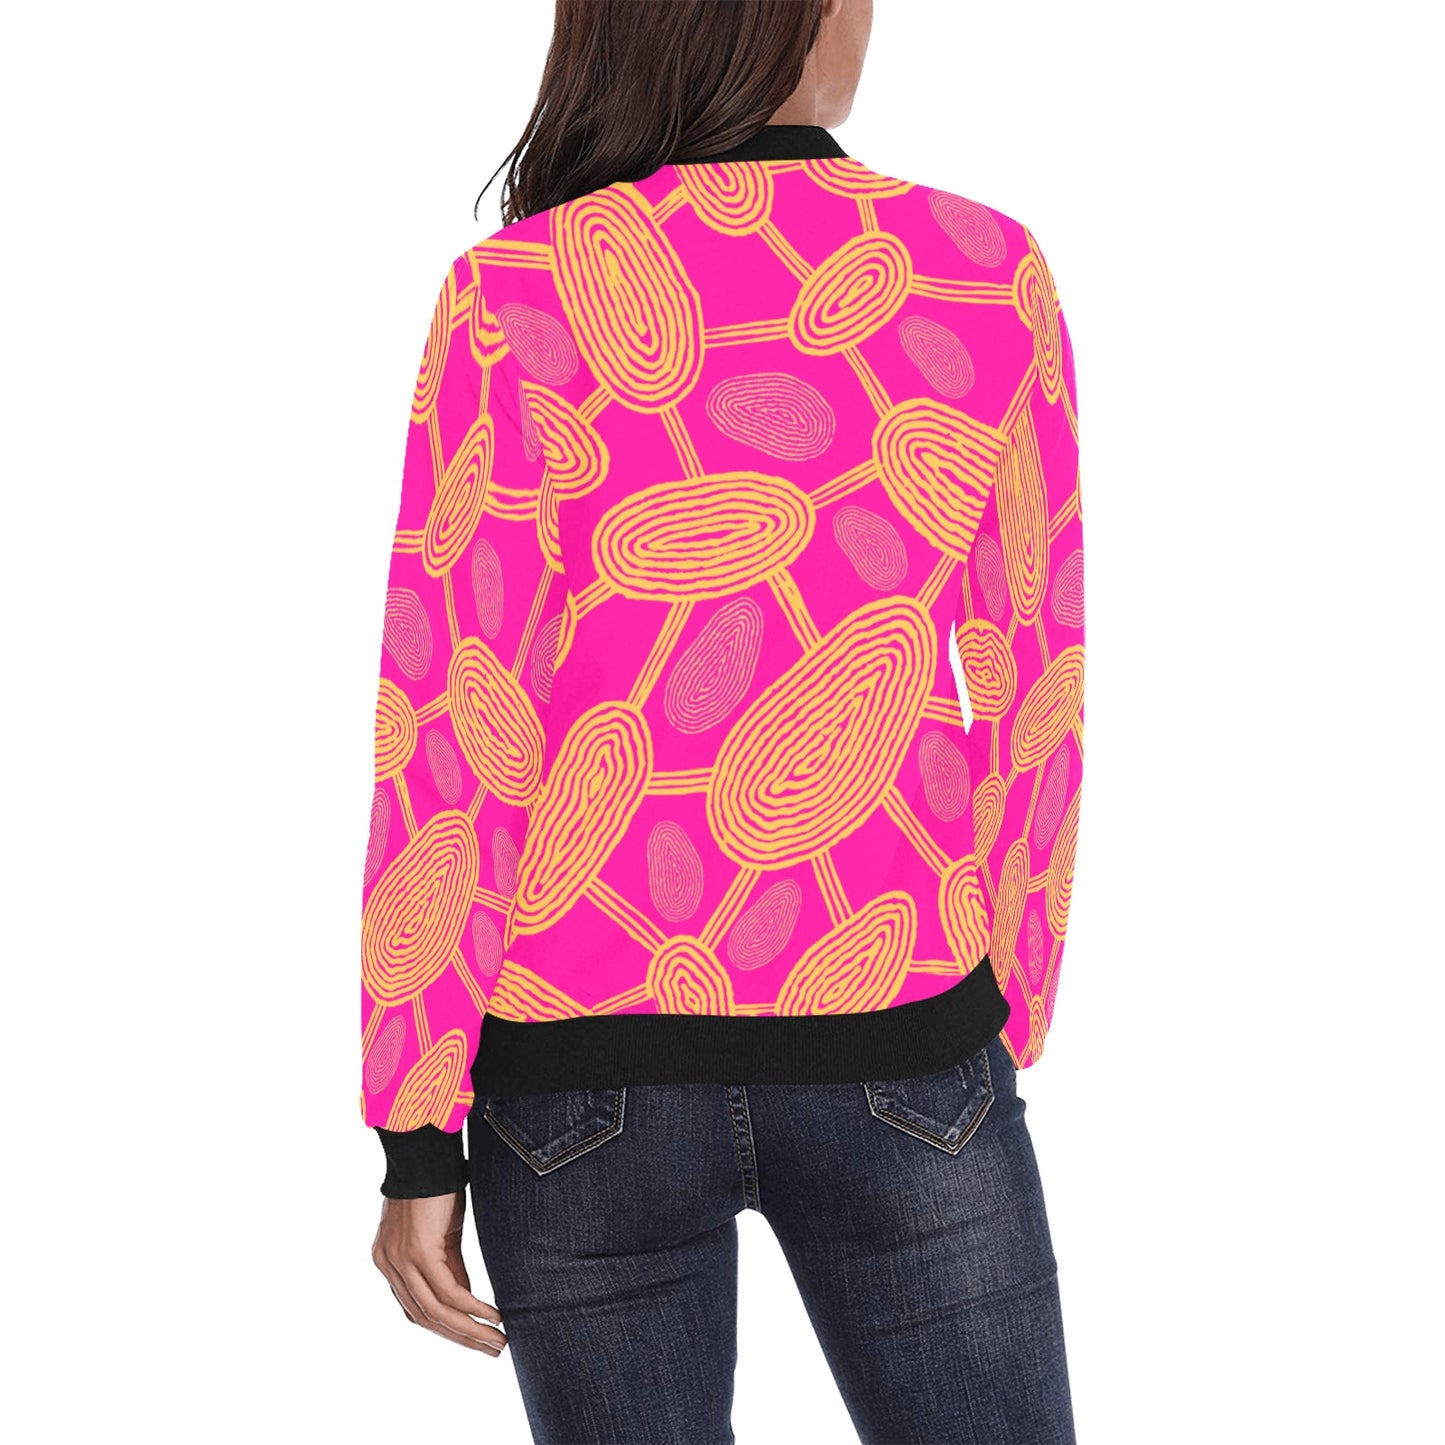 One Eat, we all eat Womens Bomber Jacket by Koori Threads